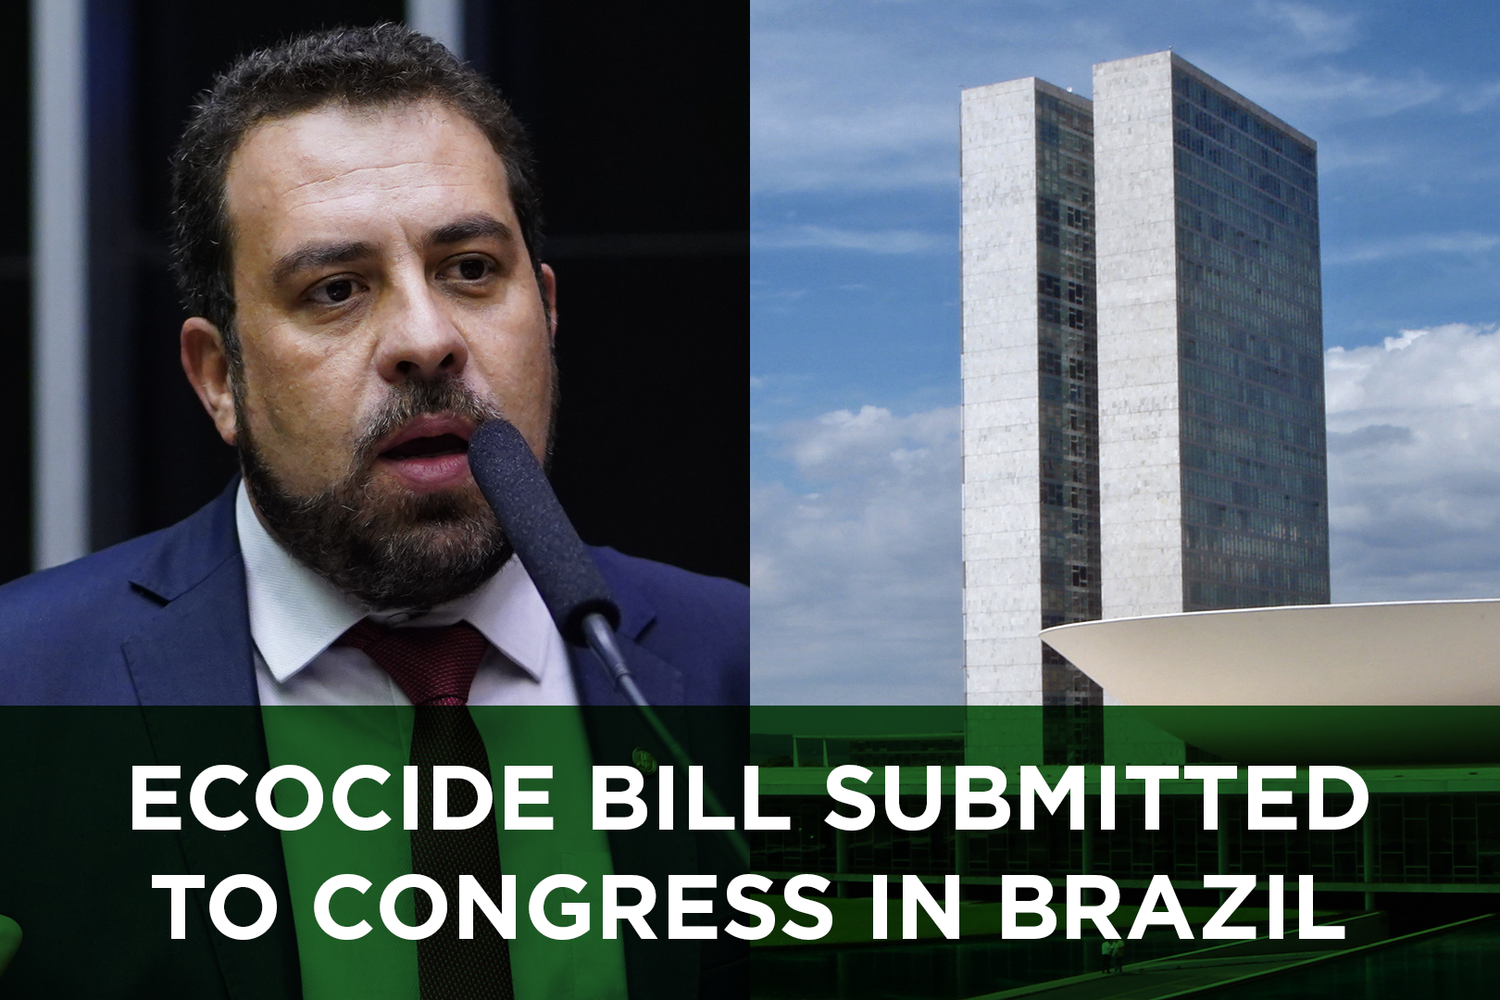 Ecocide bill submitted to congress in Brazil — Stop Ecocide International